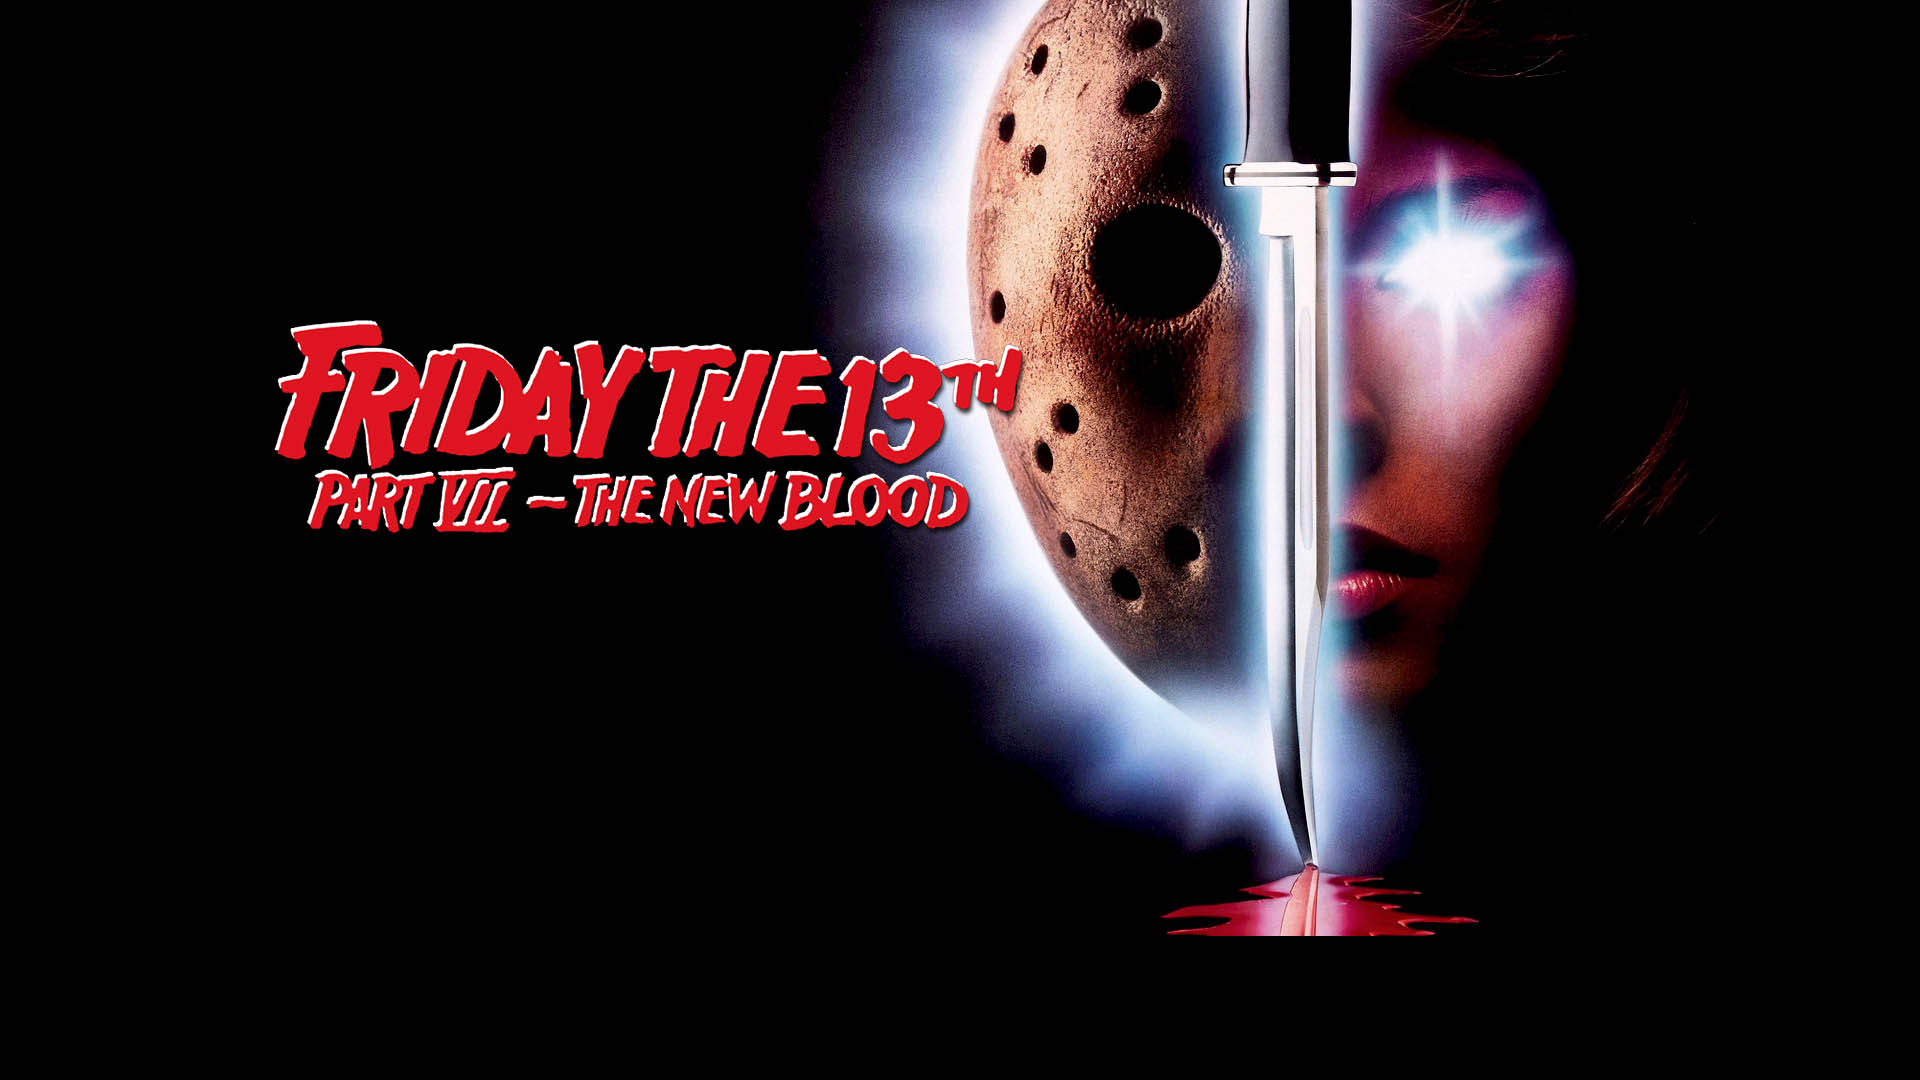 Watch Friday 13th Part VII: New Blood Online | Stream Full Movies